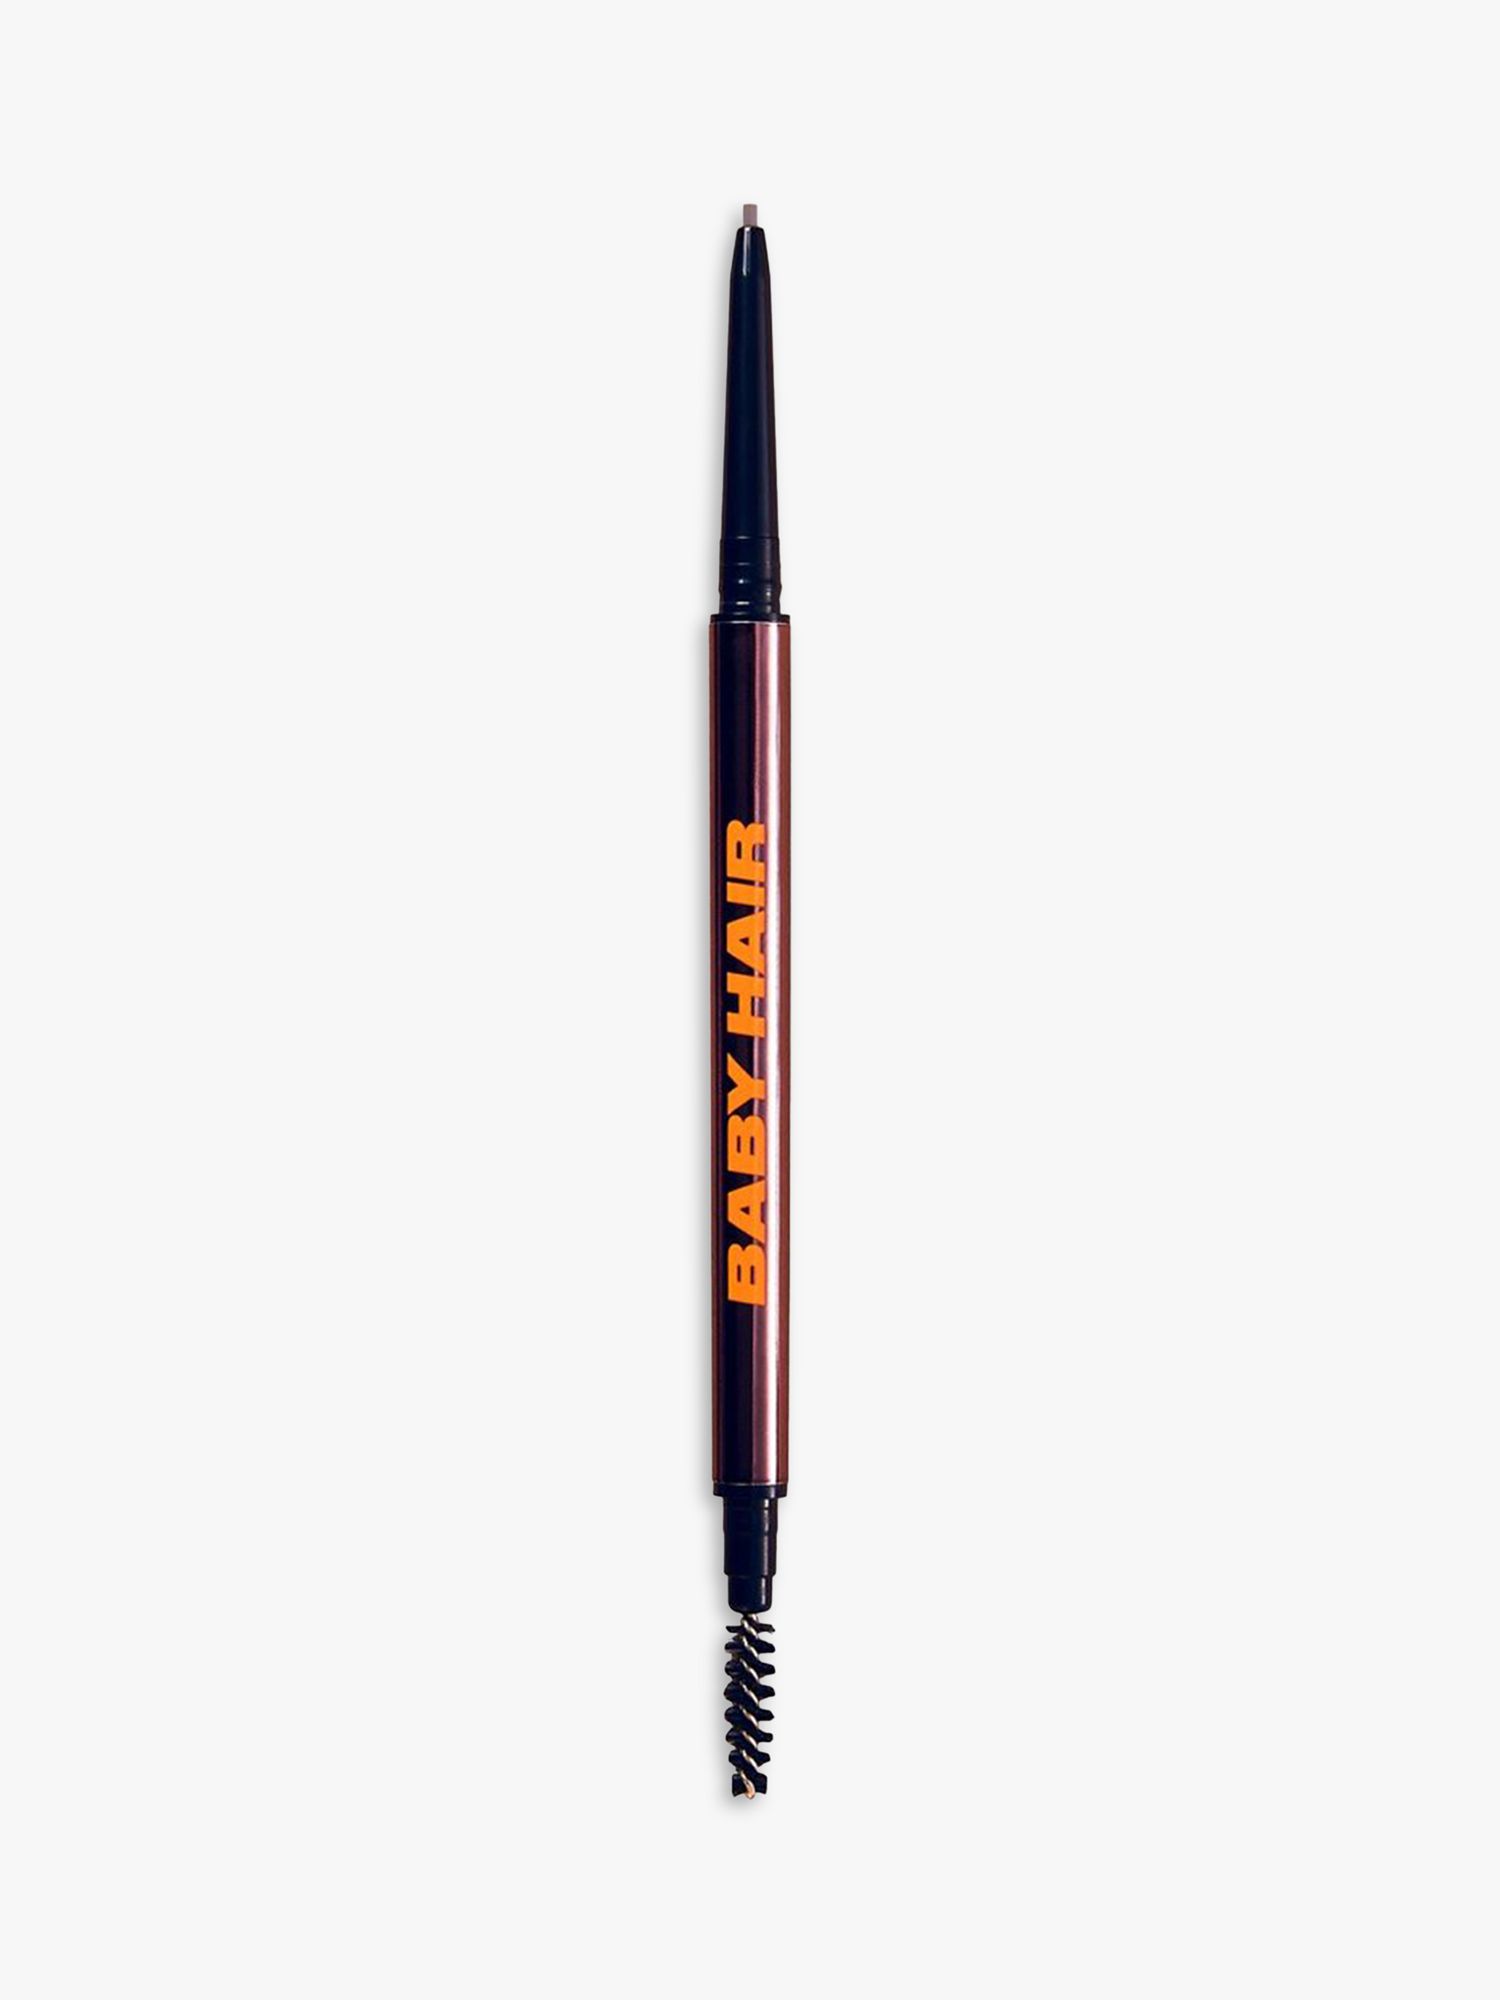 UOMA Beauty BROW-FRO BABY HAIR Brow Pencil, 02 Golden Blonde 1